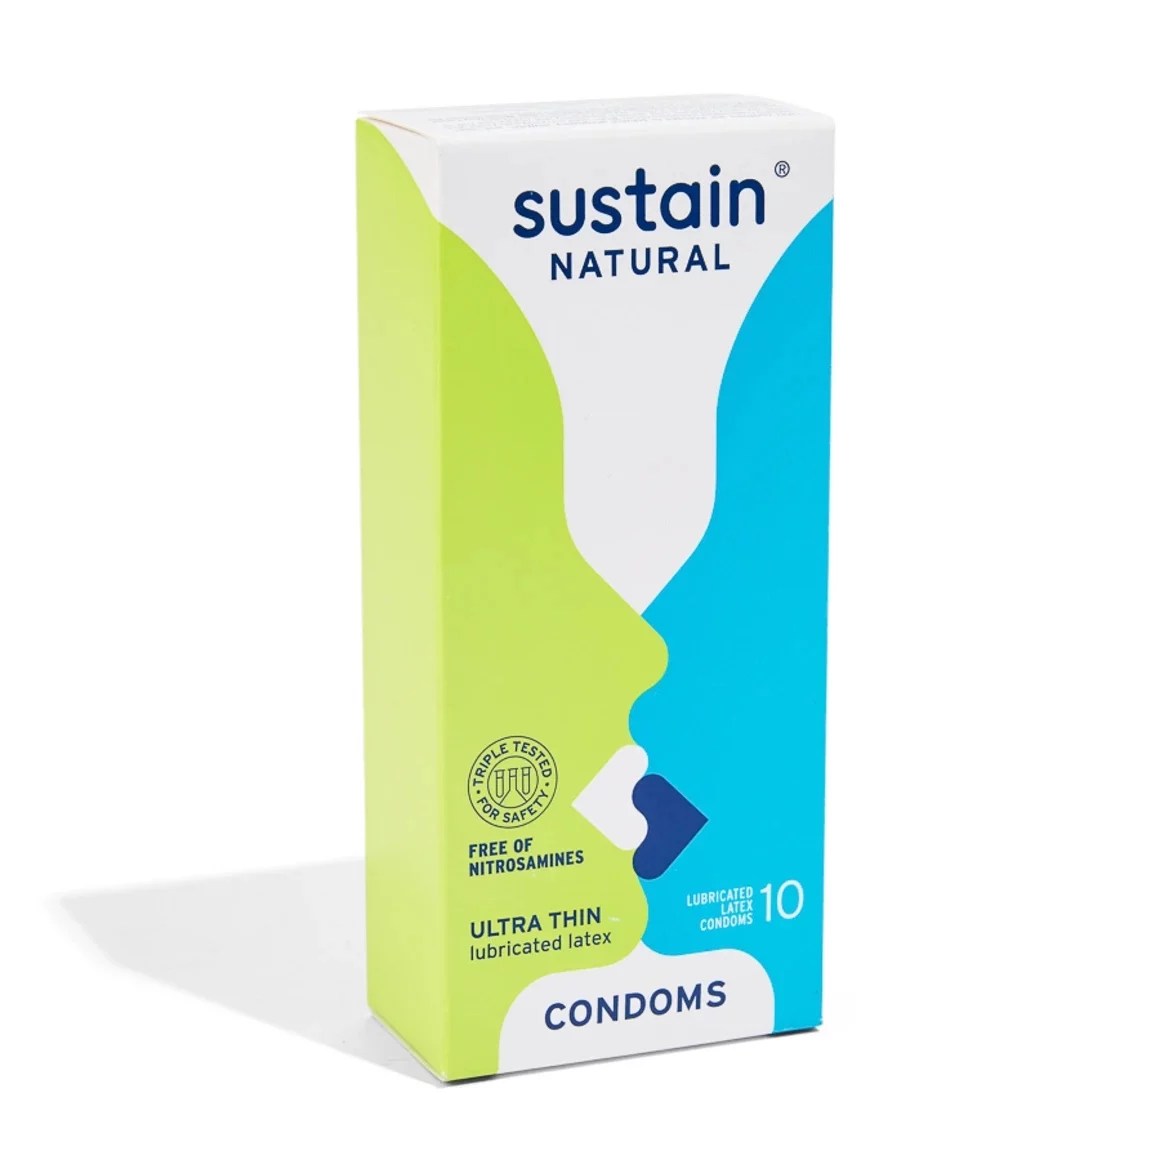 Fair Trade Certified, this option from Sustain is part of this guide to condoms.